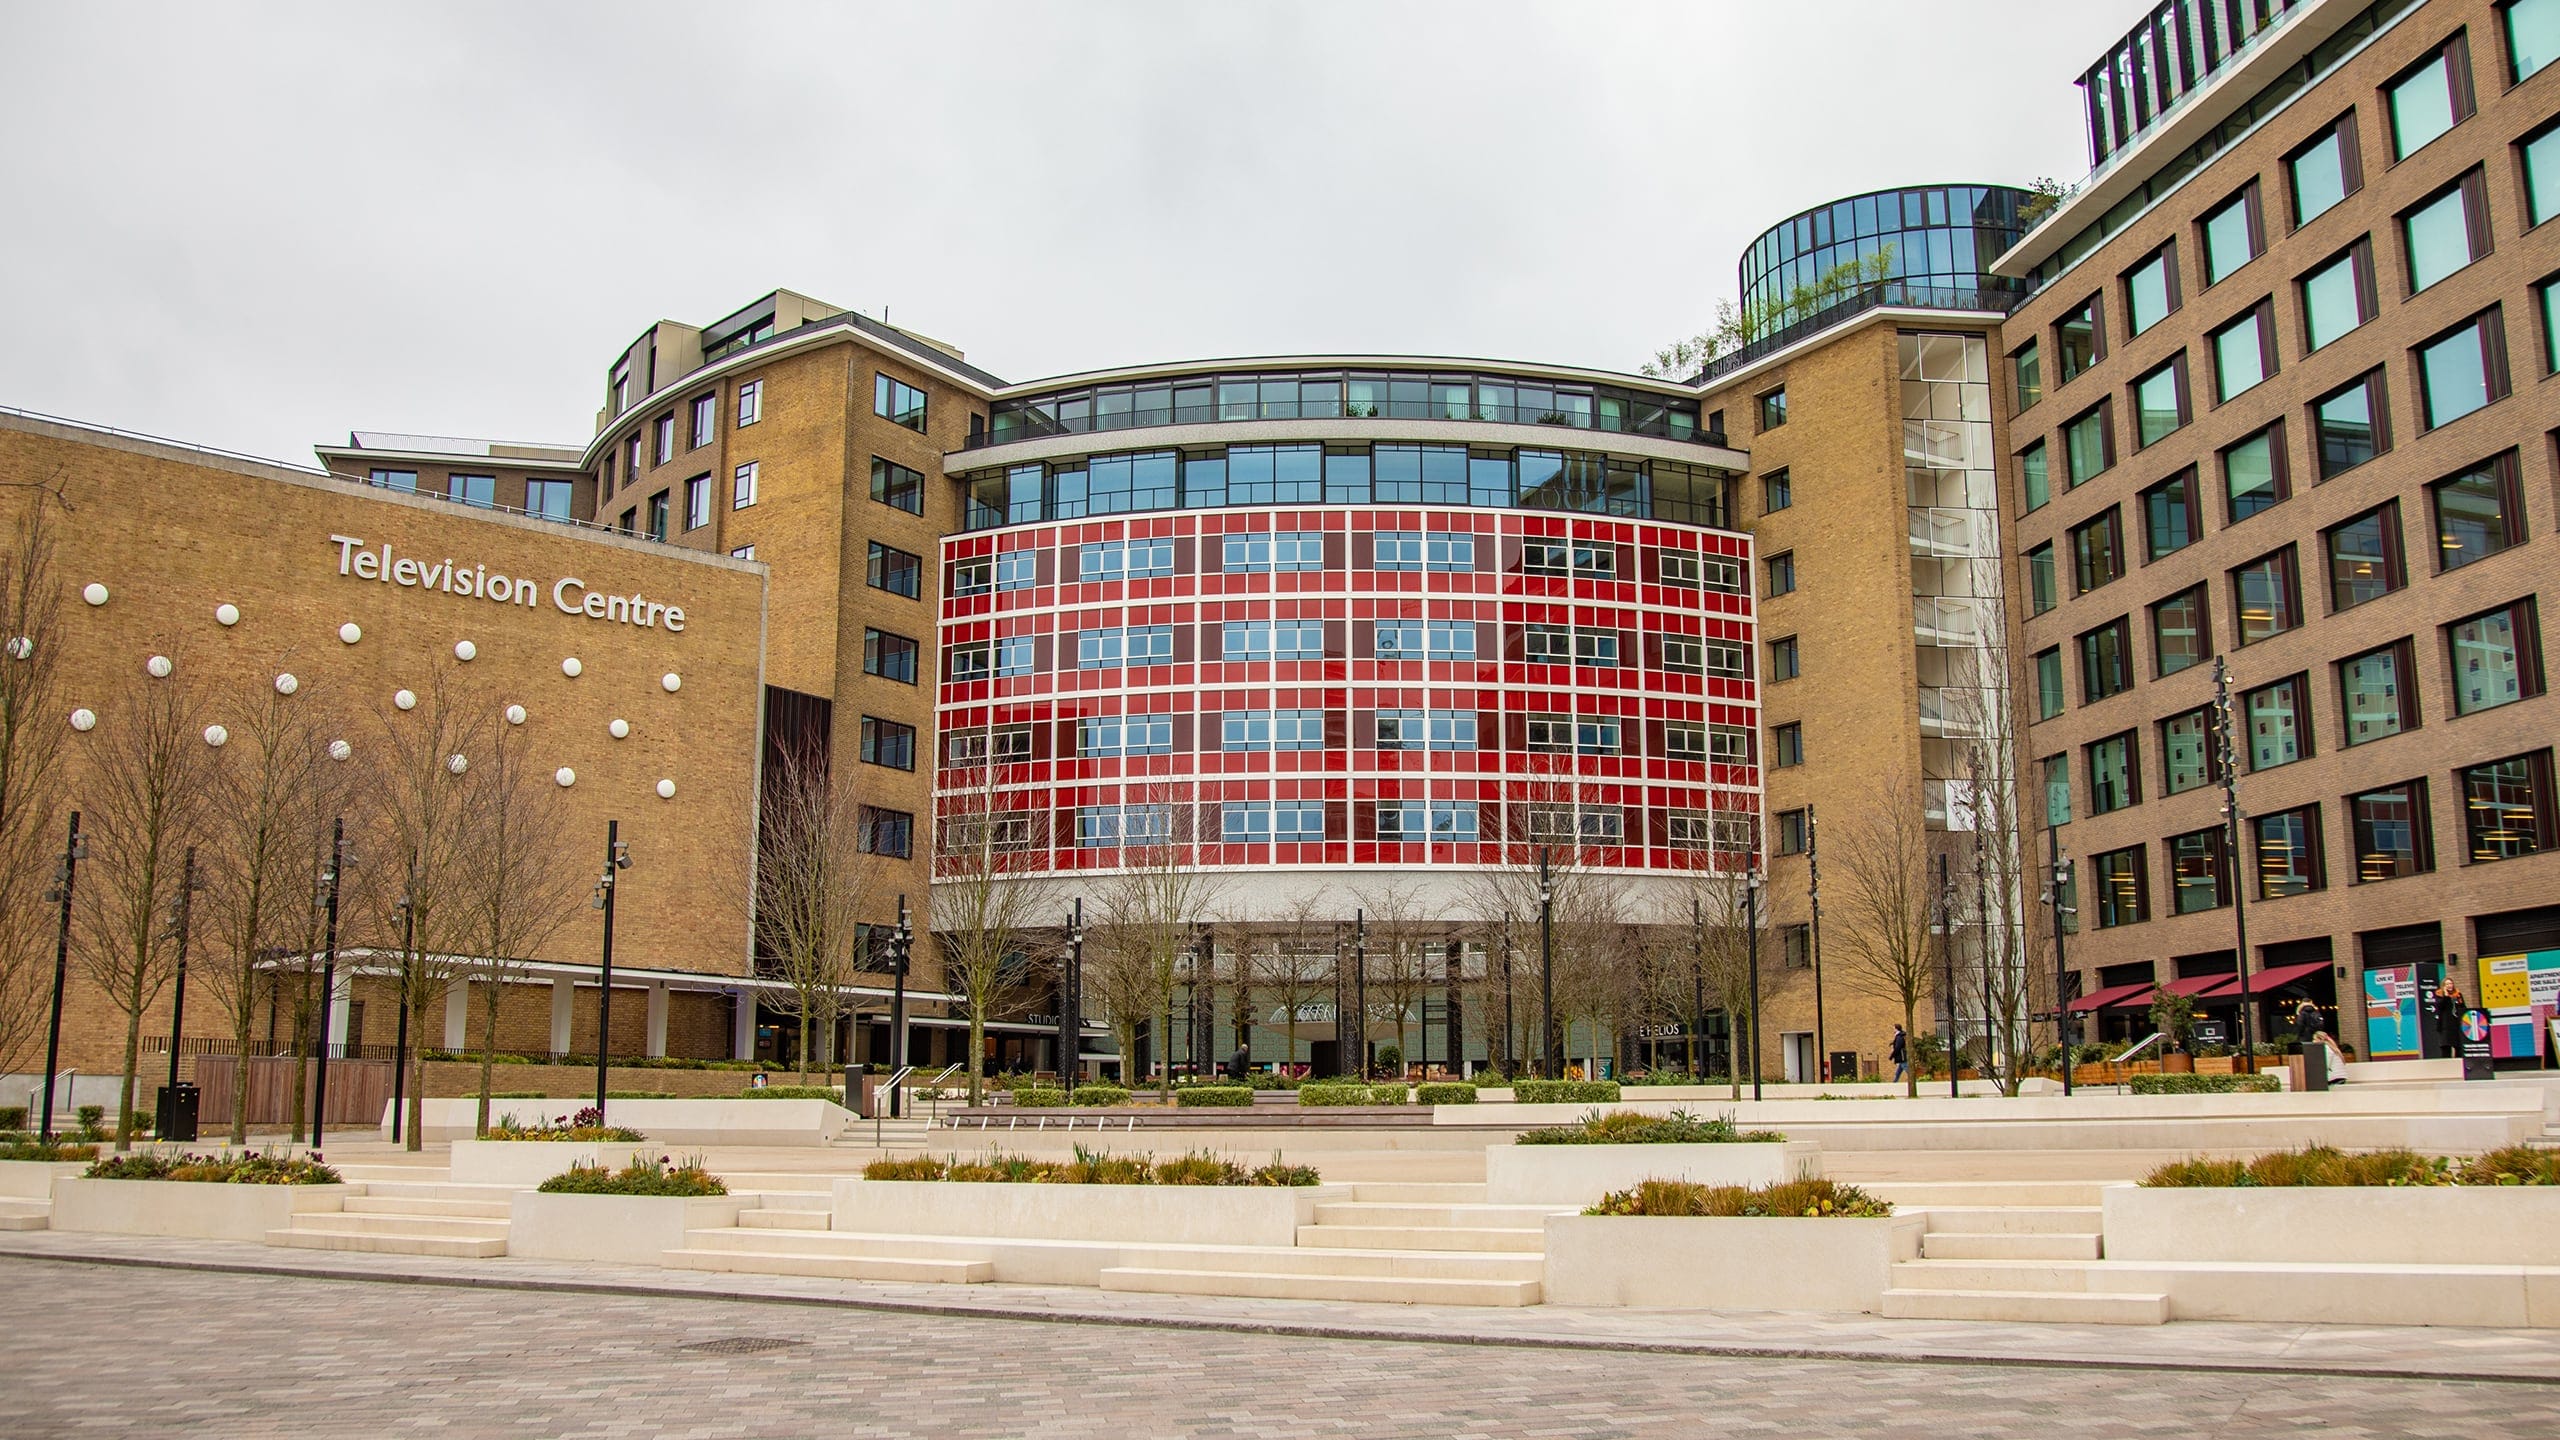 mjl-our-projects-BBC-Television-Centre-header